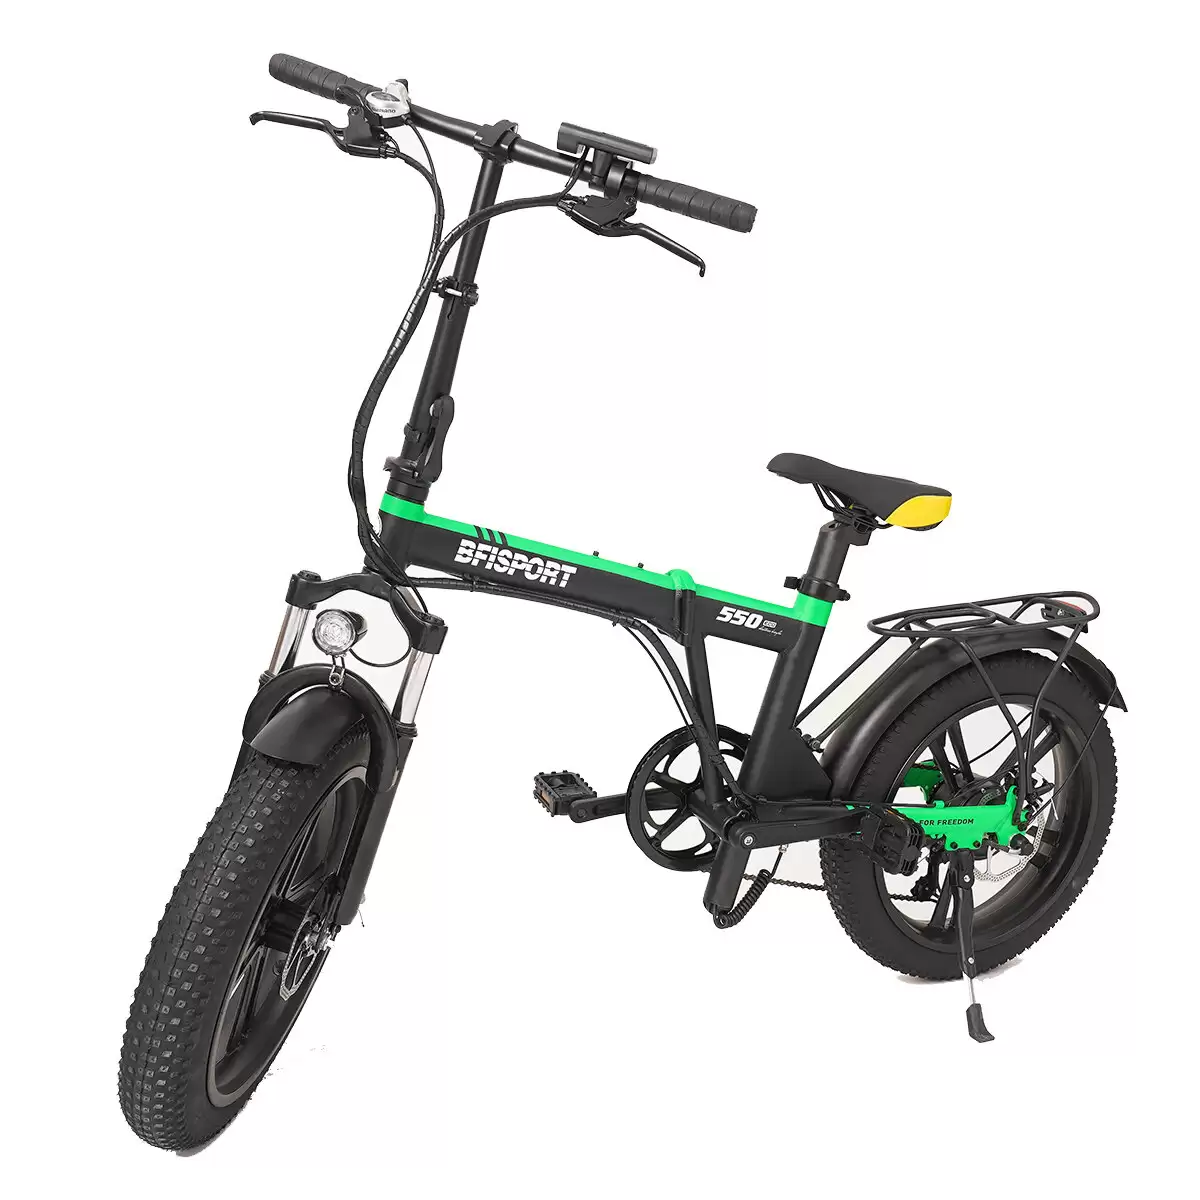 Order In Just $885.99 19% Off Forbfisport Eb20-2f 36v 6.4ah 250w Folding Electric Bike With This Coupon At Banggood